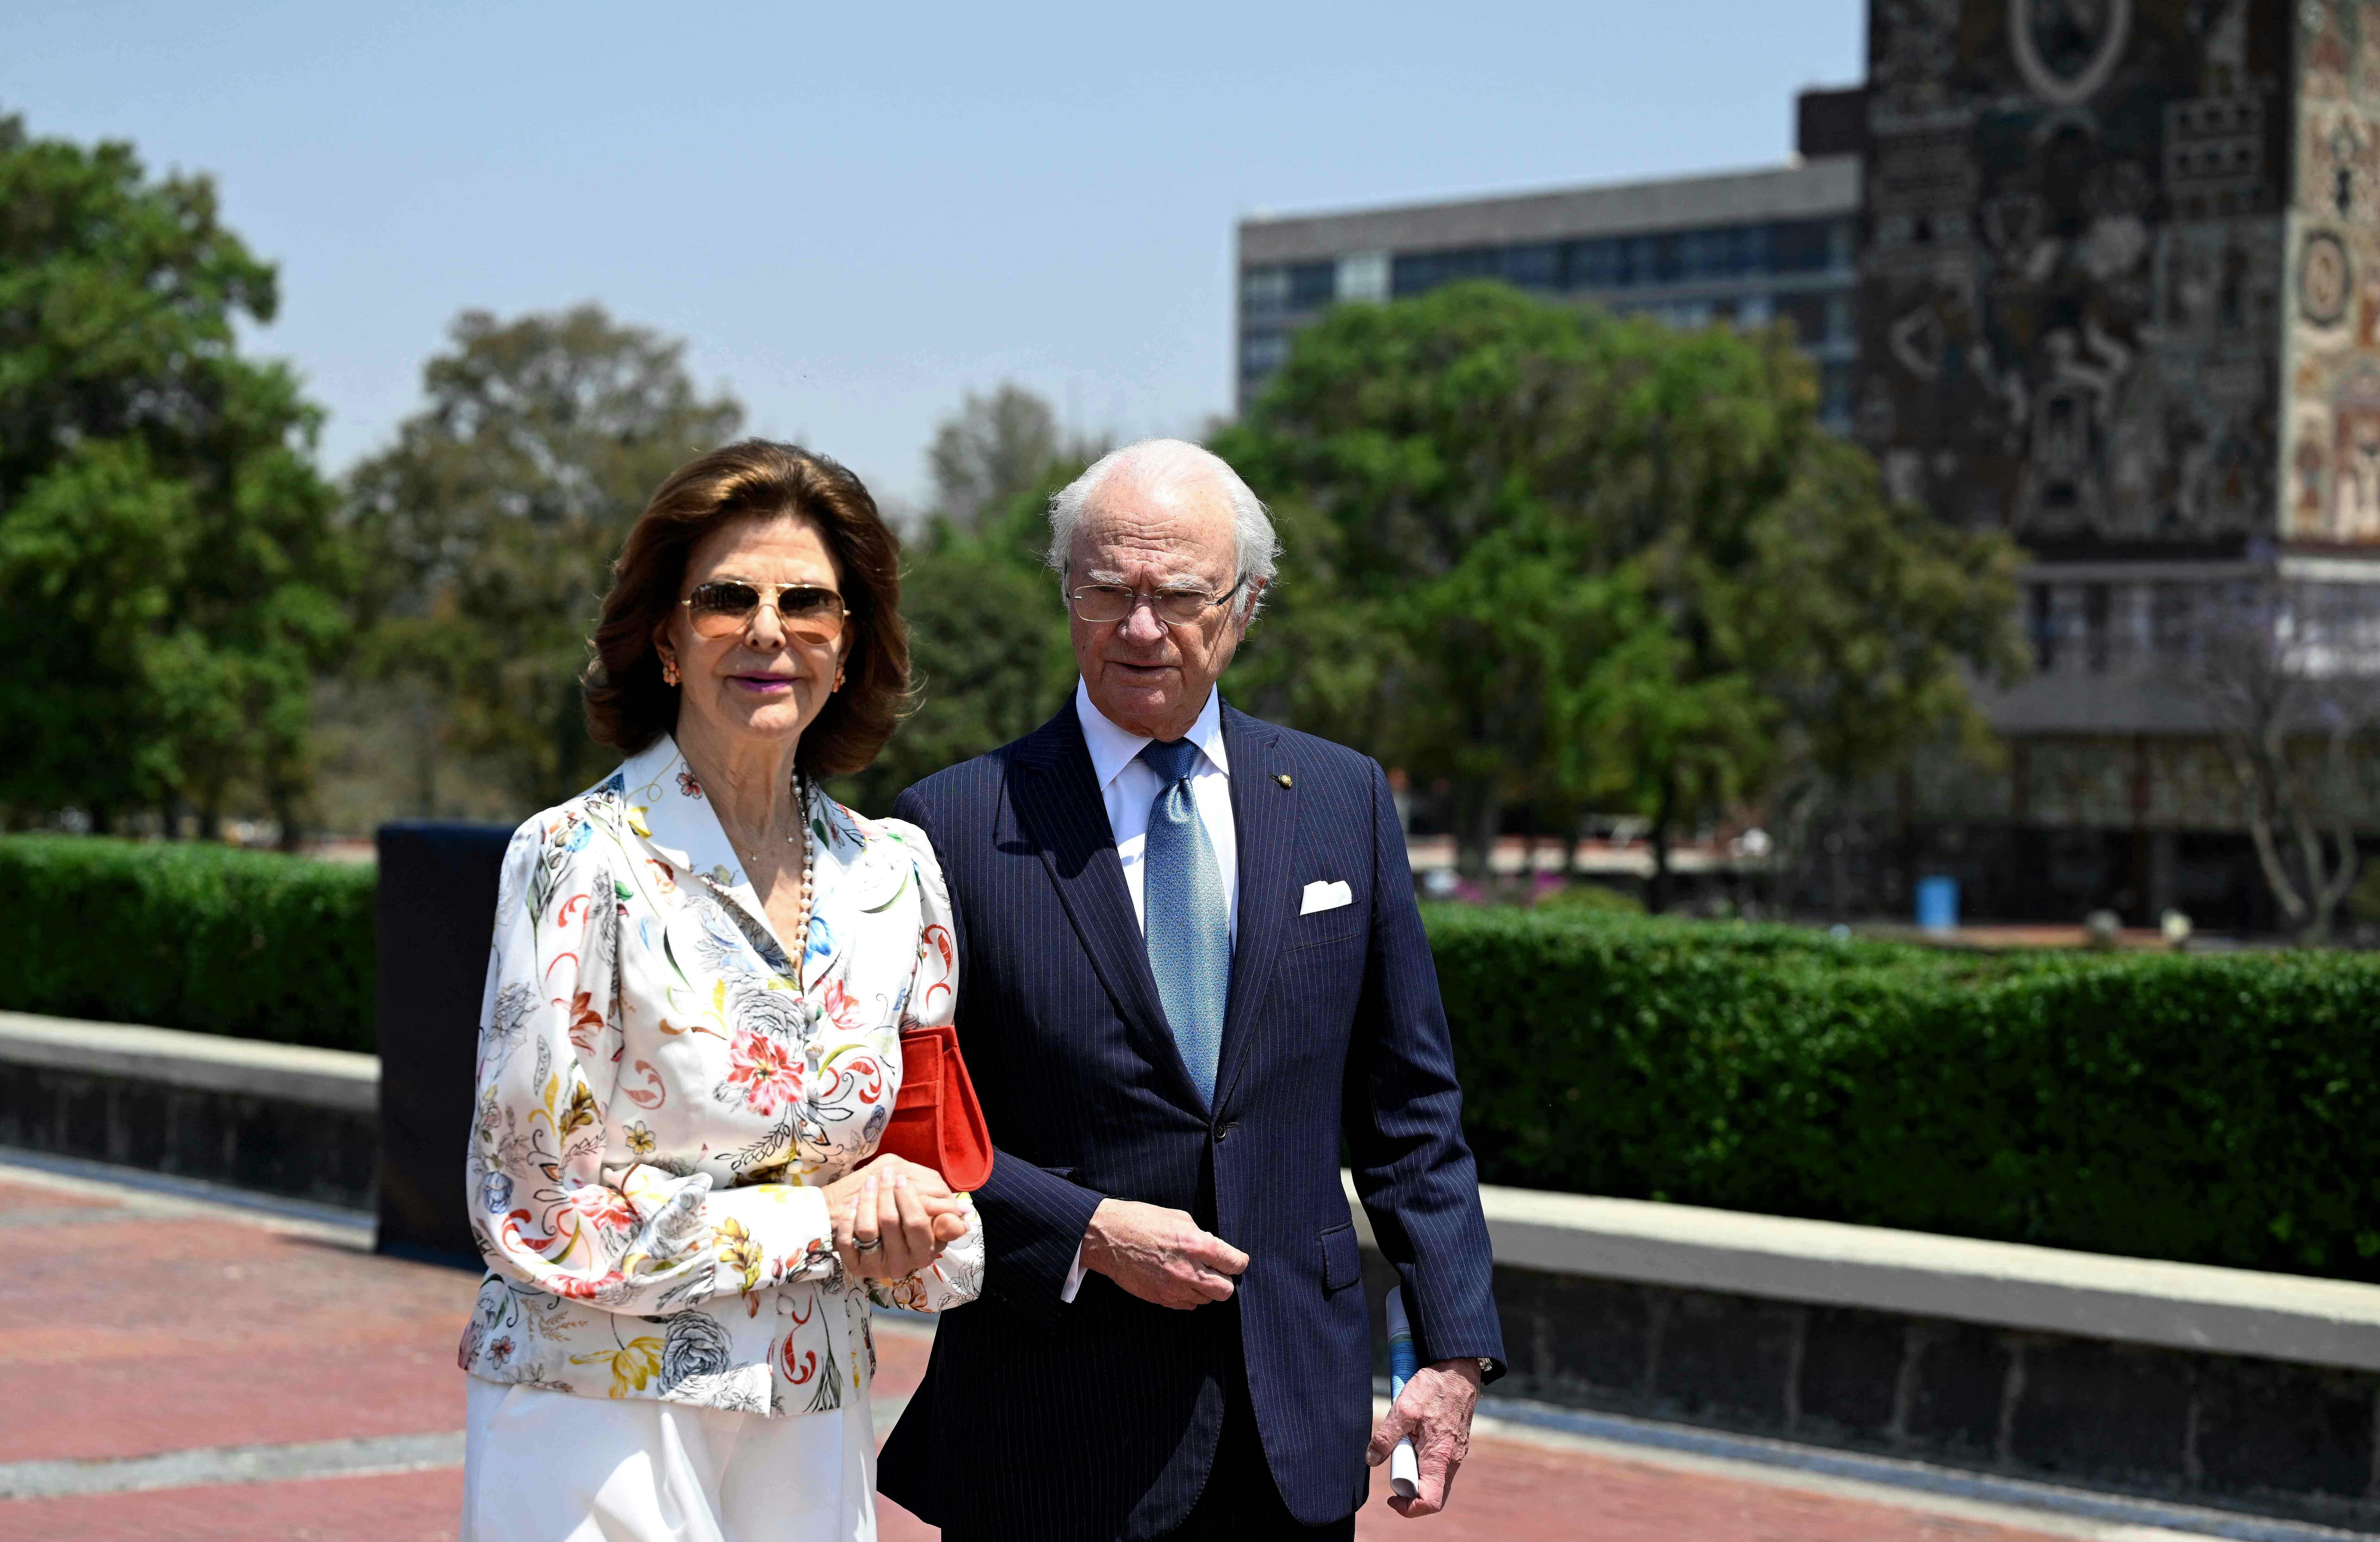 King Carl XVI Gustaf of Sweden (L) and Queen Silvia of Sweden pose for a picture at the National Autonomous University of Mexico (UNAM) in Ciudad Universitaria in Mexico City on March 13, 2024. (Photo by ALFREDO ESTRELLA / AFP)